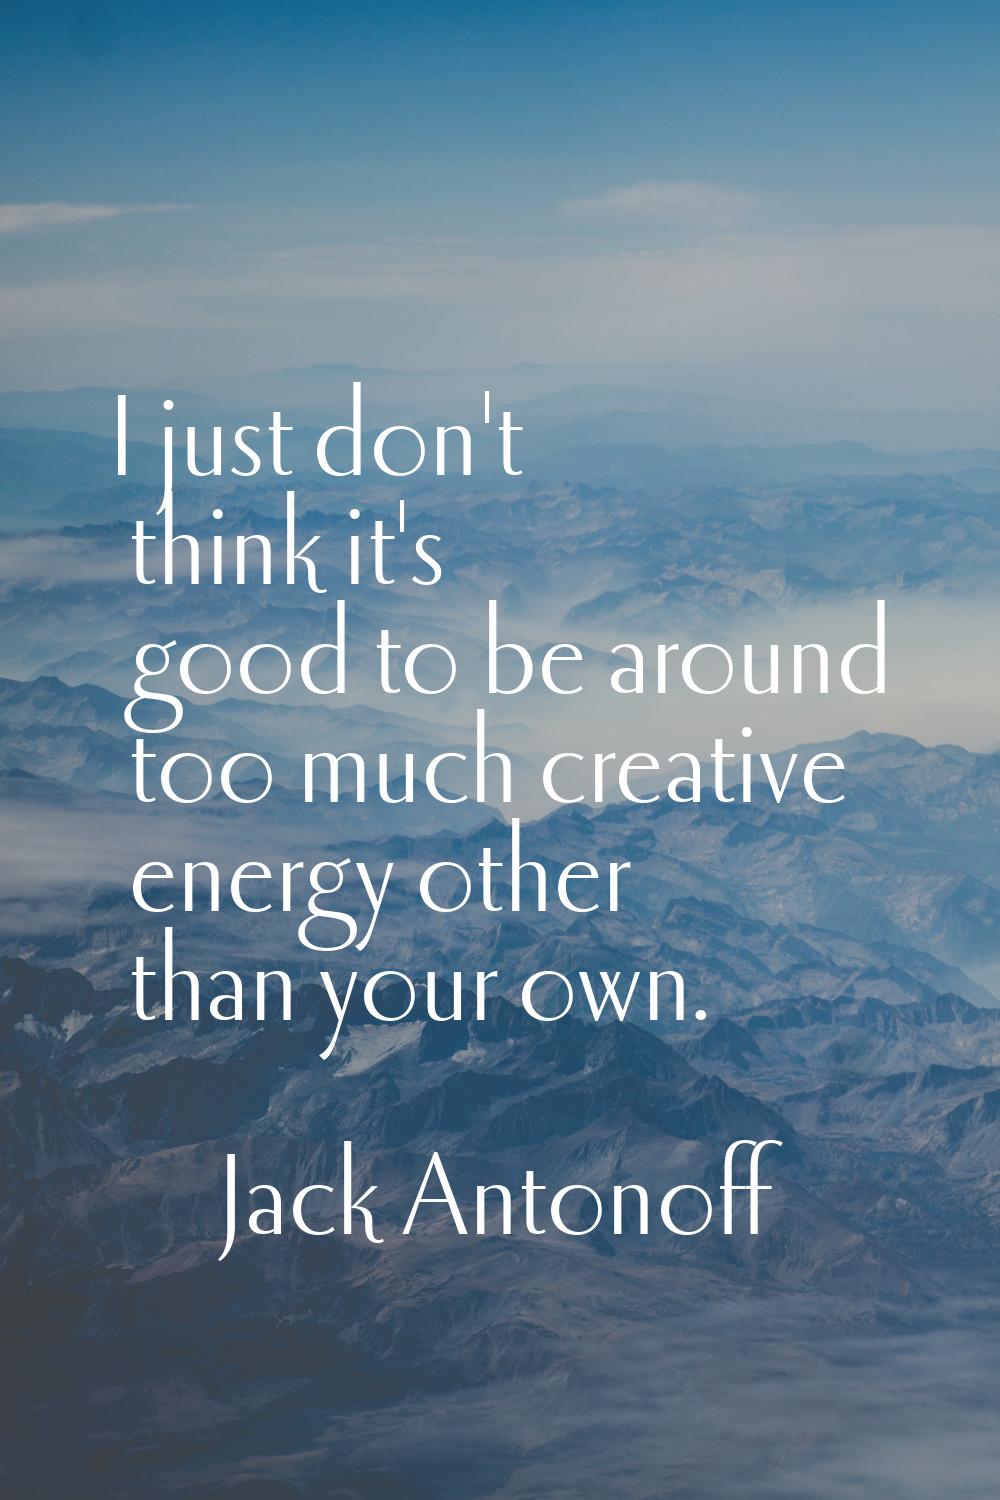 I just don't think it's good to be around too much creative energy other than your own.